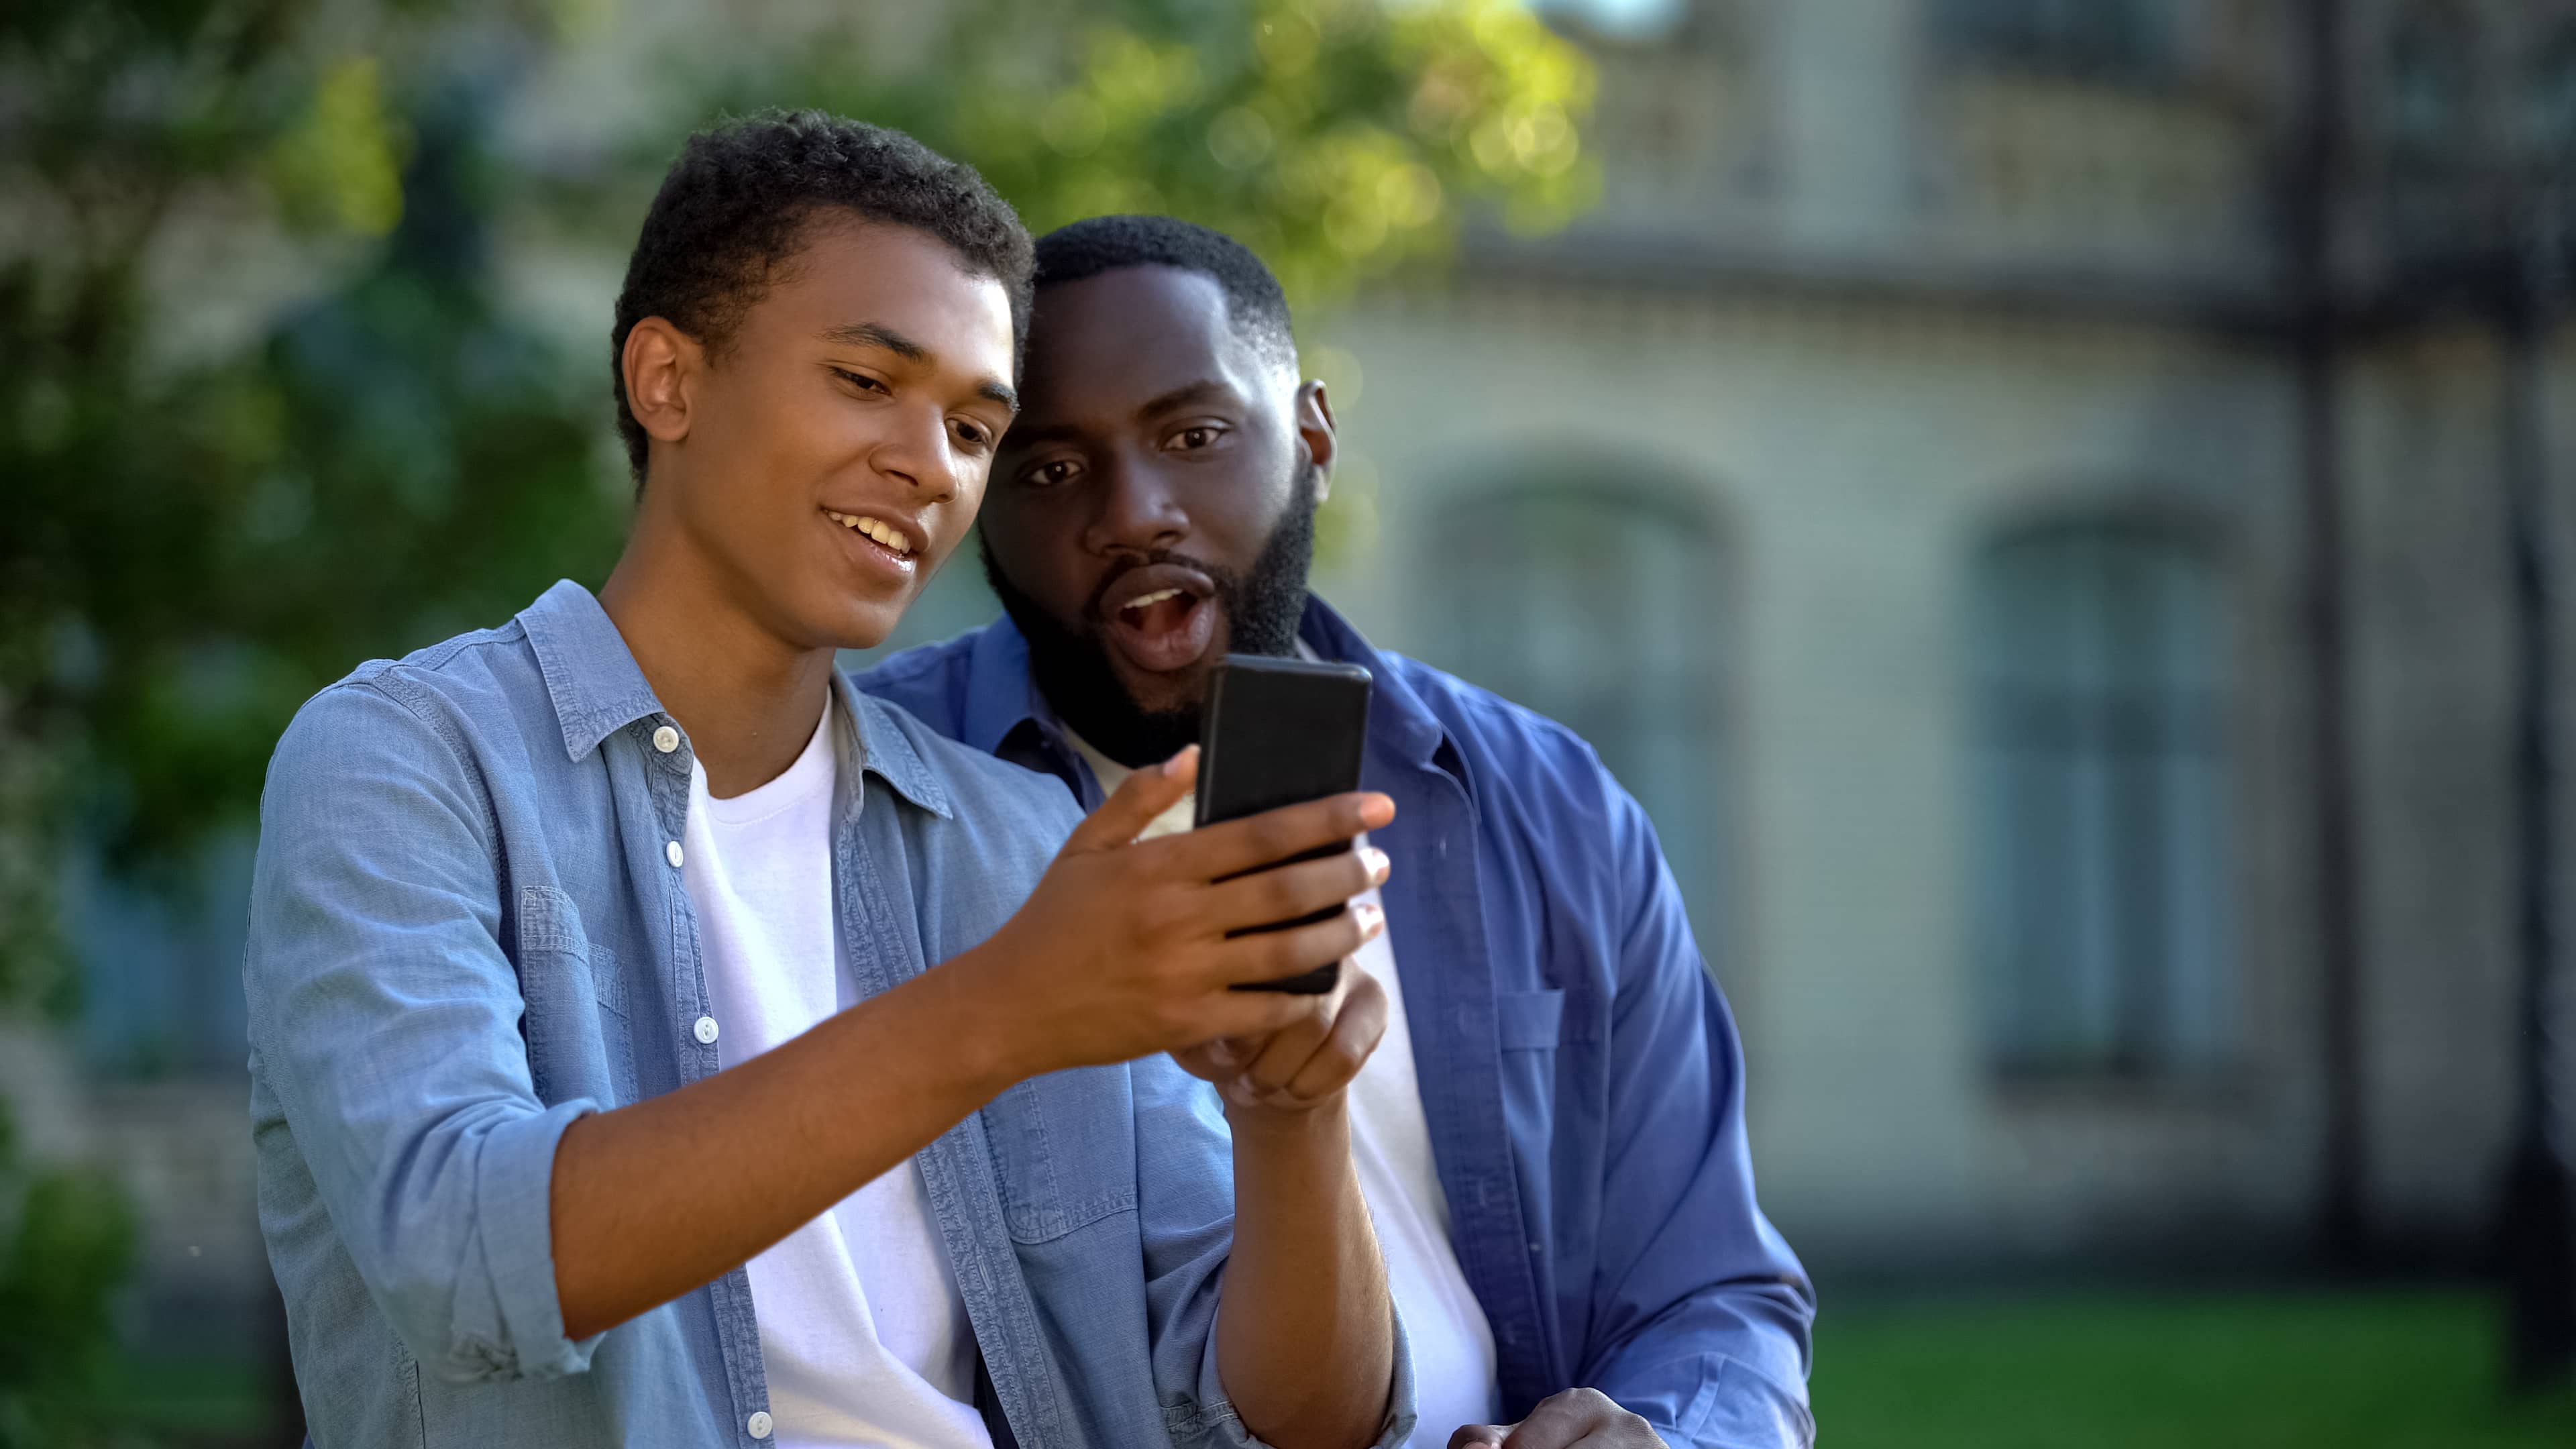 Black teenage boy showing his father a video on his smartphone